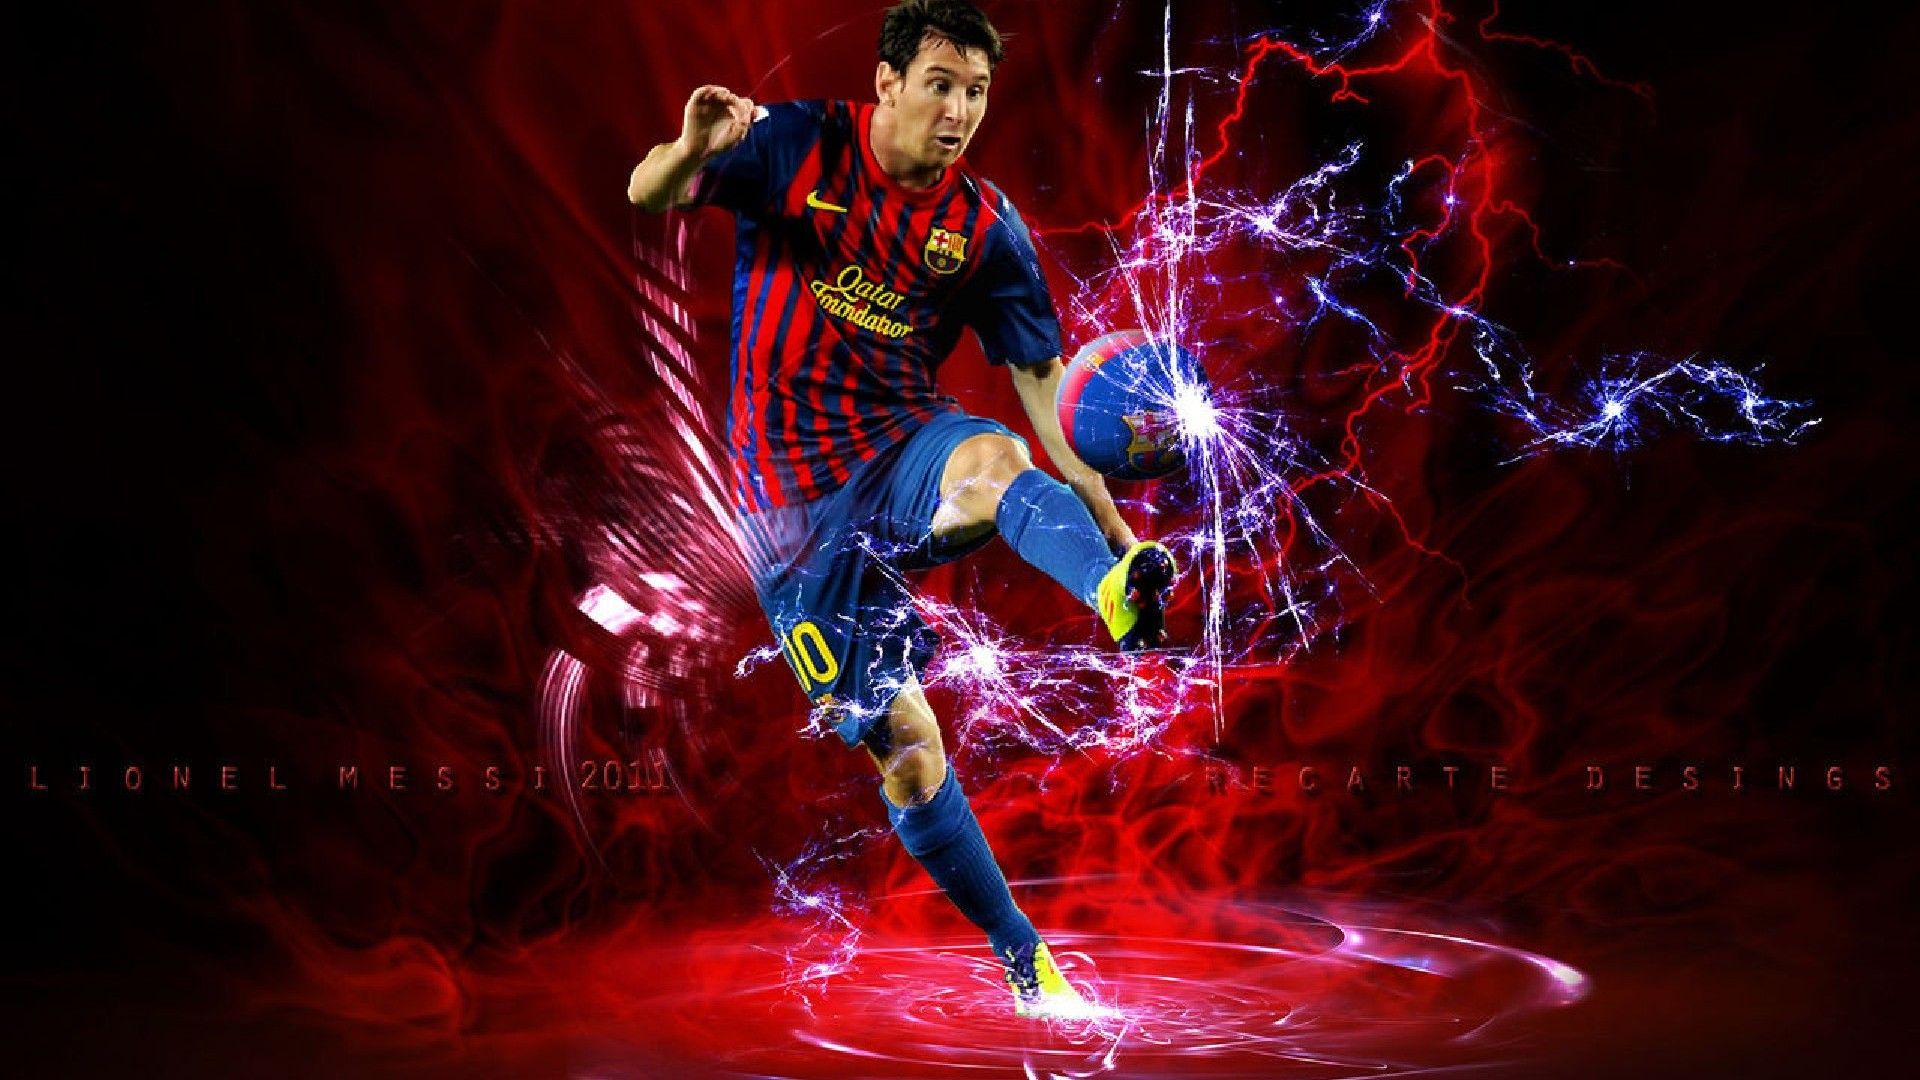 Lionel Messi Wallpaper 13 Hd Background 9 HD Wallpapers amagico 1920x1080